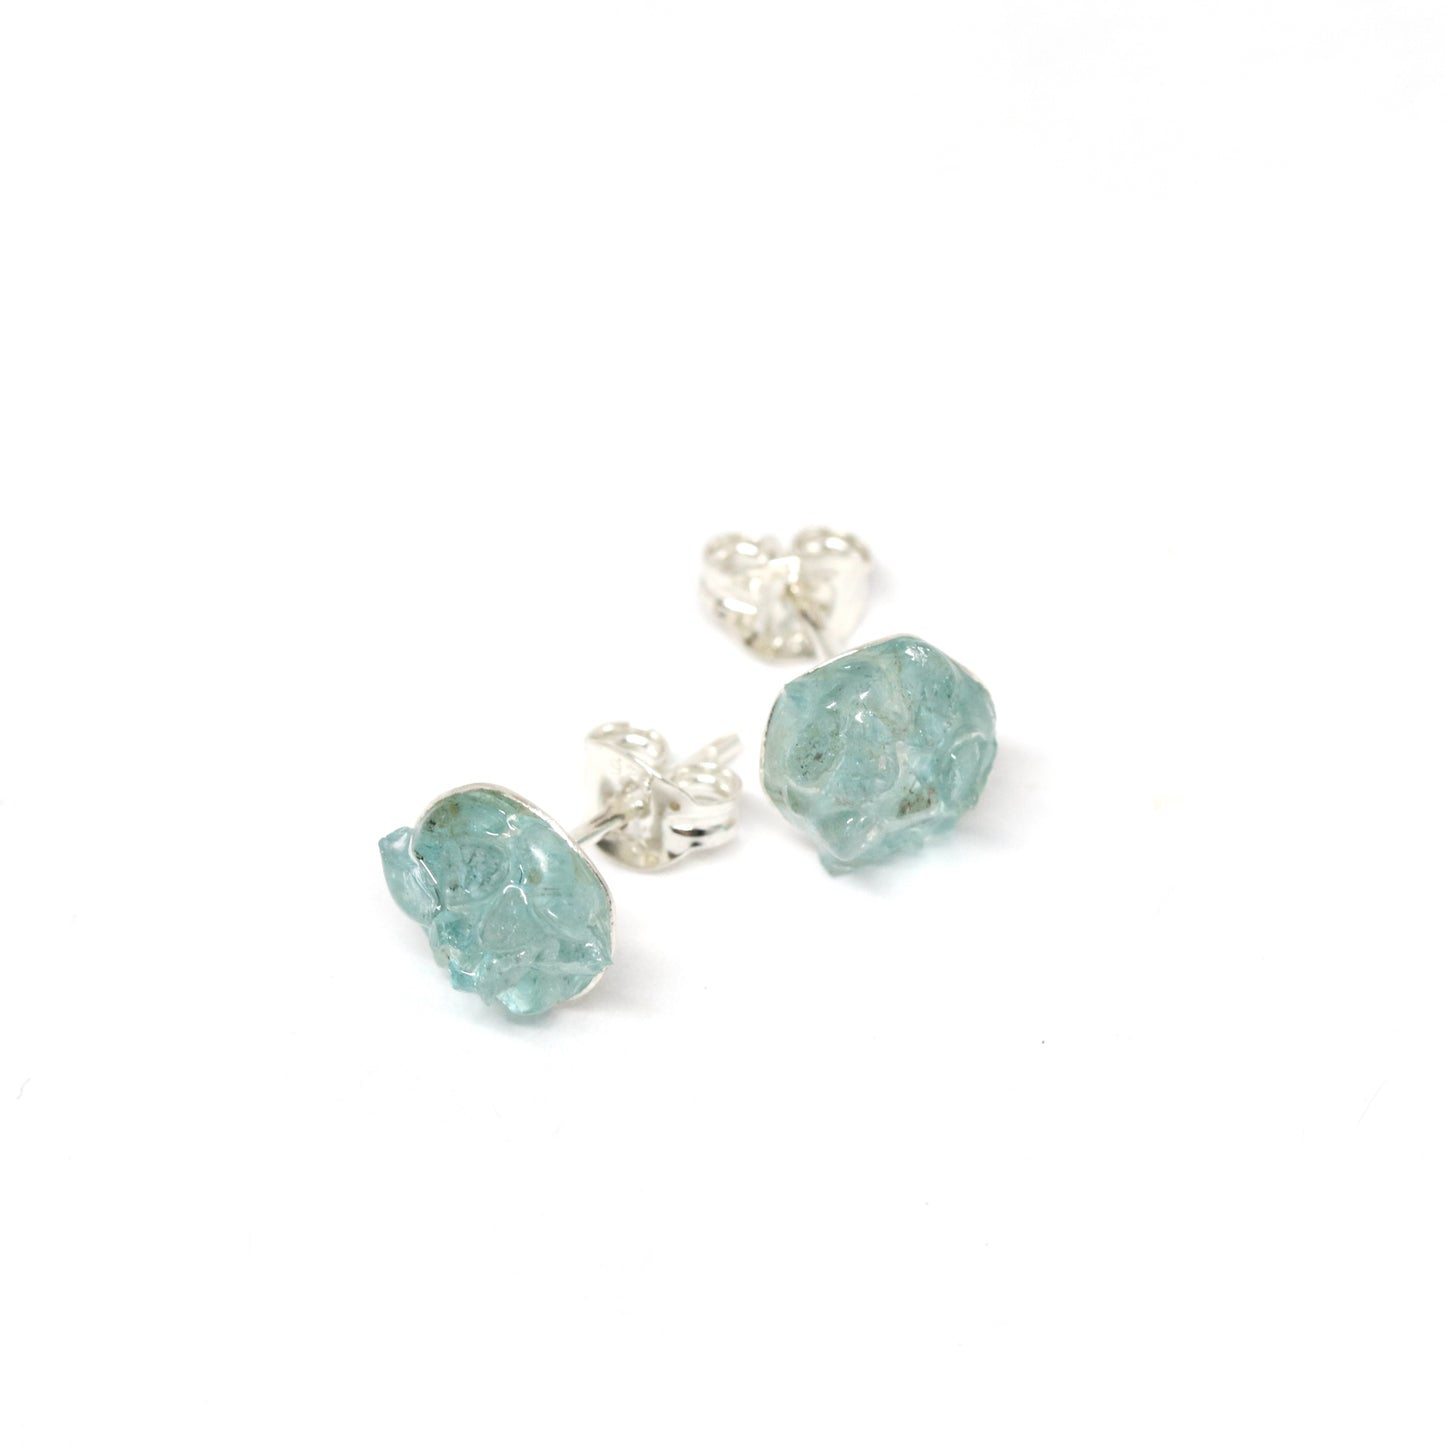 Apatite (pale). Gemstone and silver stud earrings. Made in Wanaka. Unique, colourful jewellery designed and crafted by New Zealand artist and jeweller Briar Hardy-Hesson.